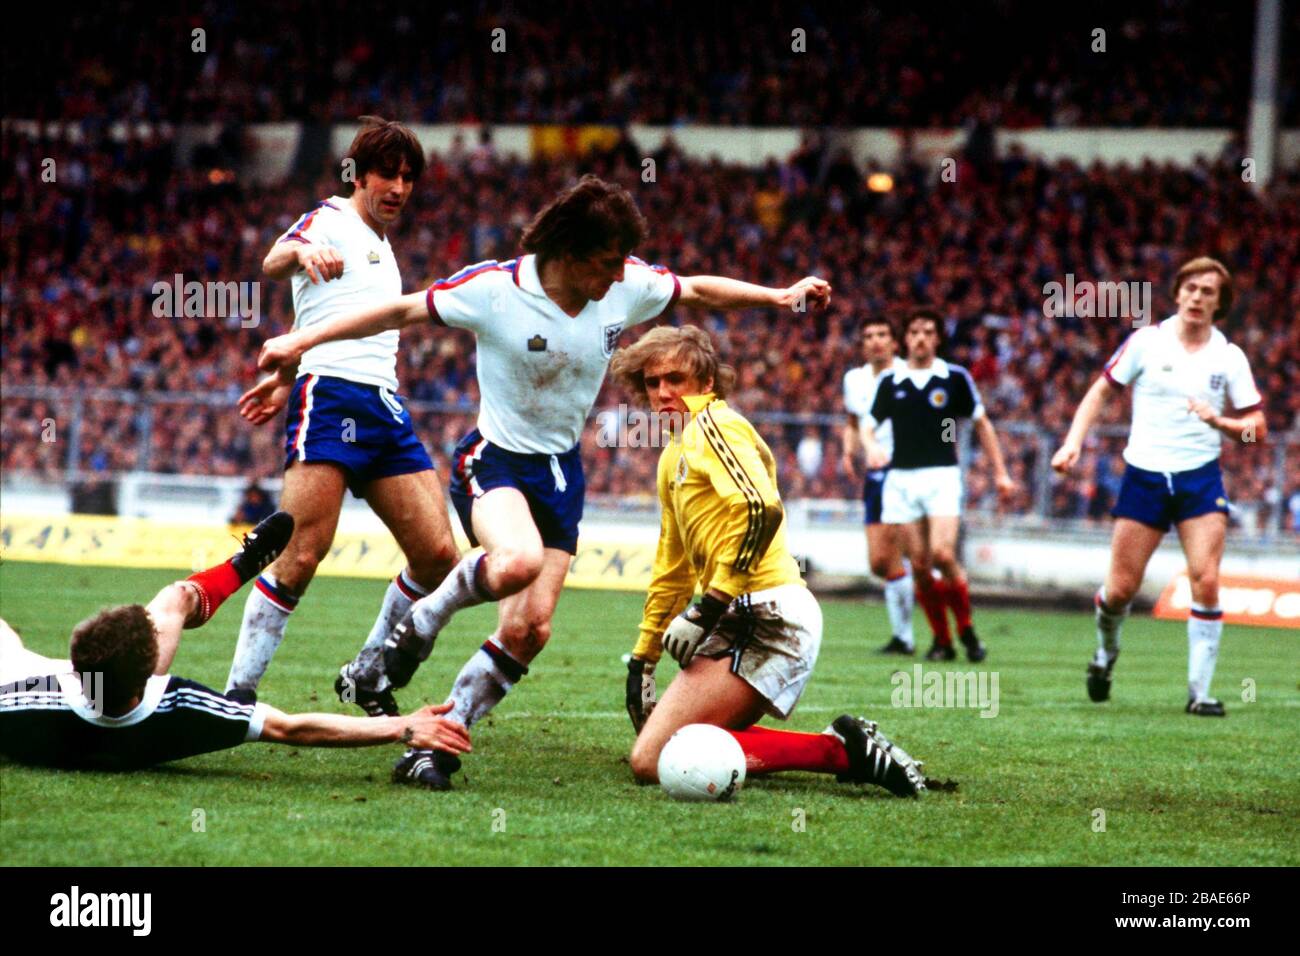 England's Steve Coppell (third left) rounds Scotland goalkeeper George Wood (centre) to score, as teammates Peter Barnes (right) and Bob Latchford (second left) look on Stock Photo